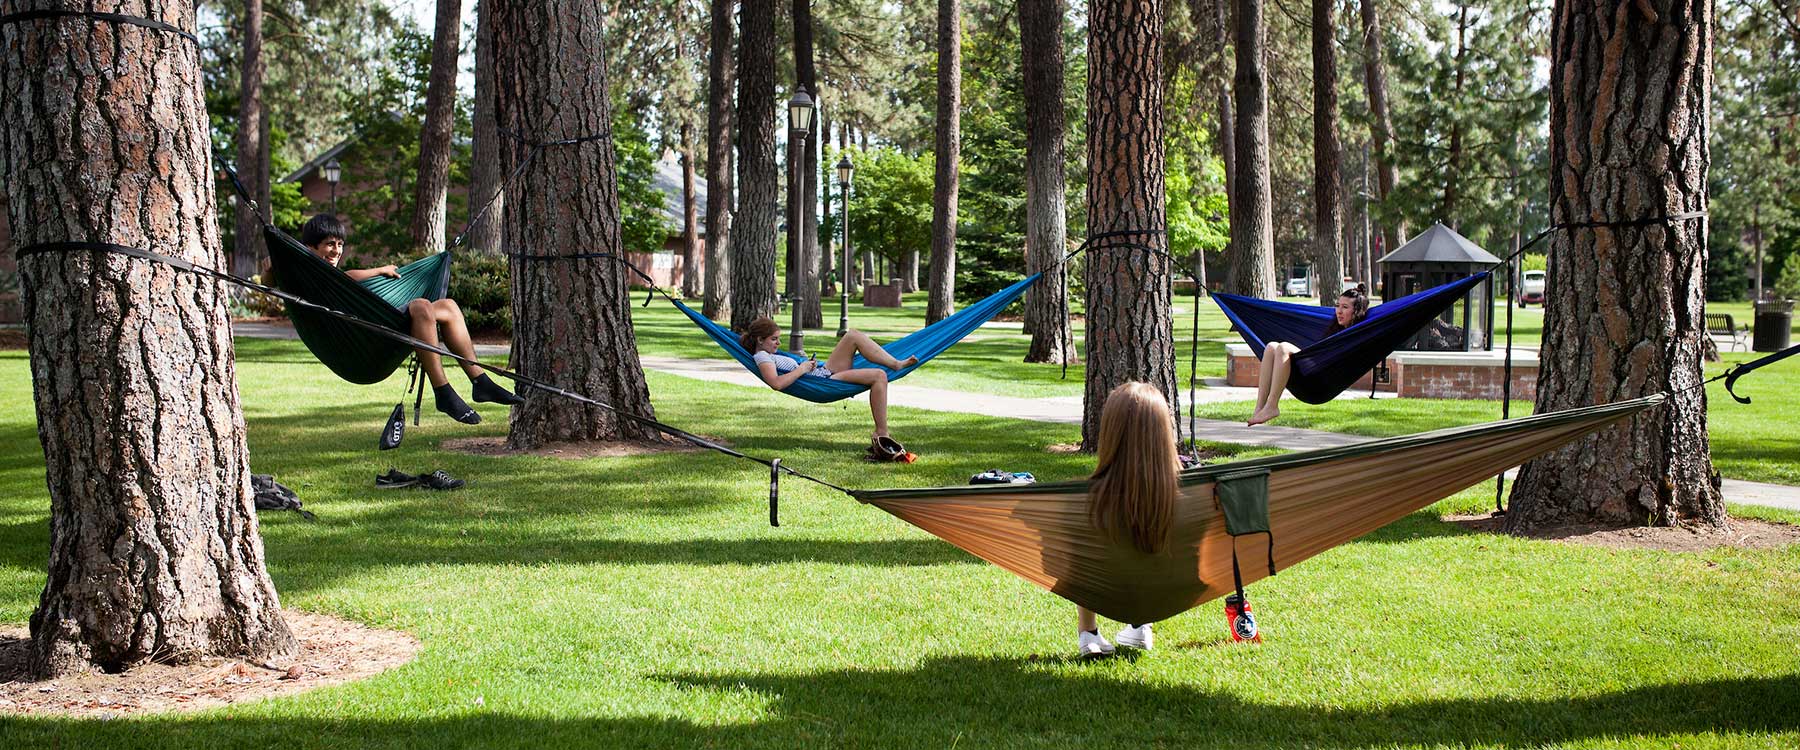 Campus scene with students sitting in hammocks